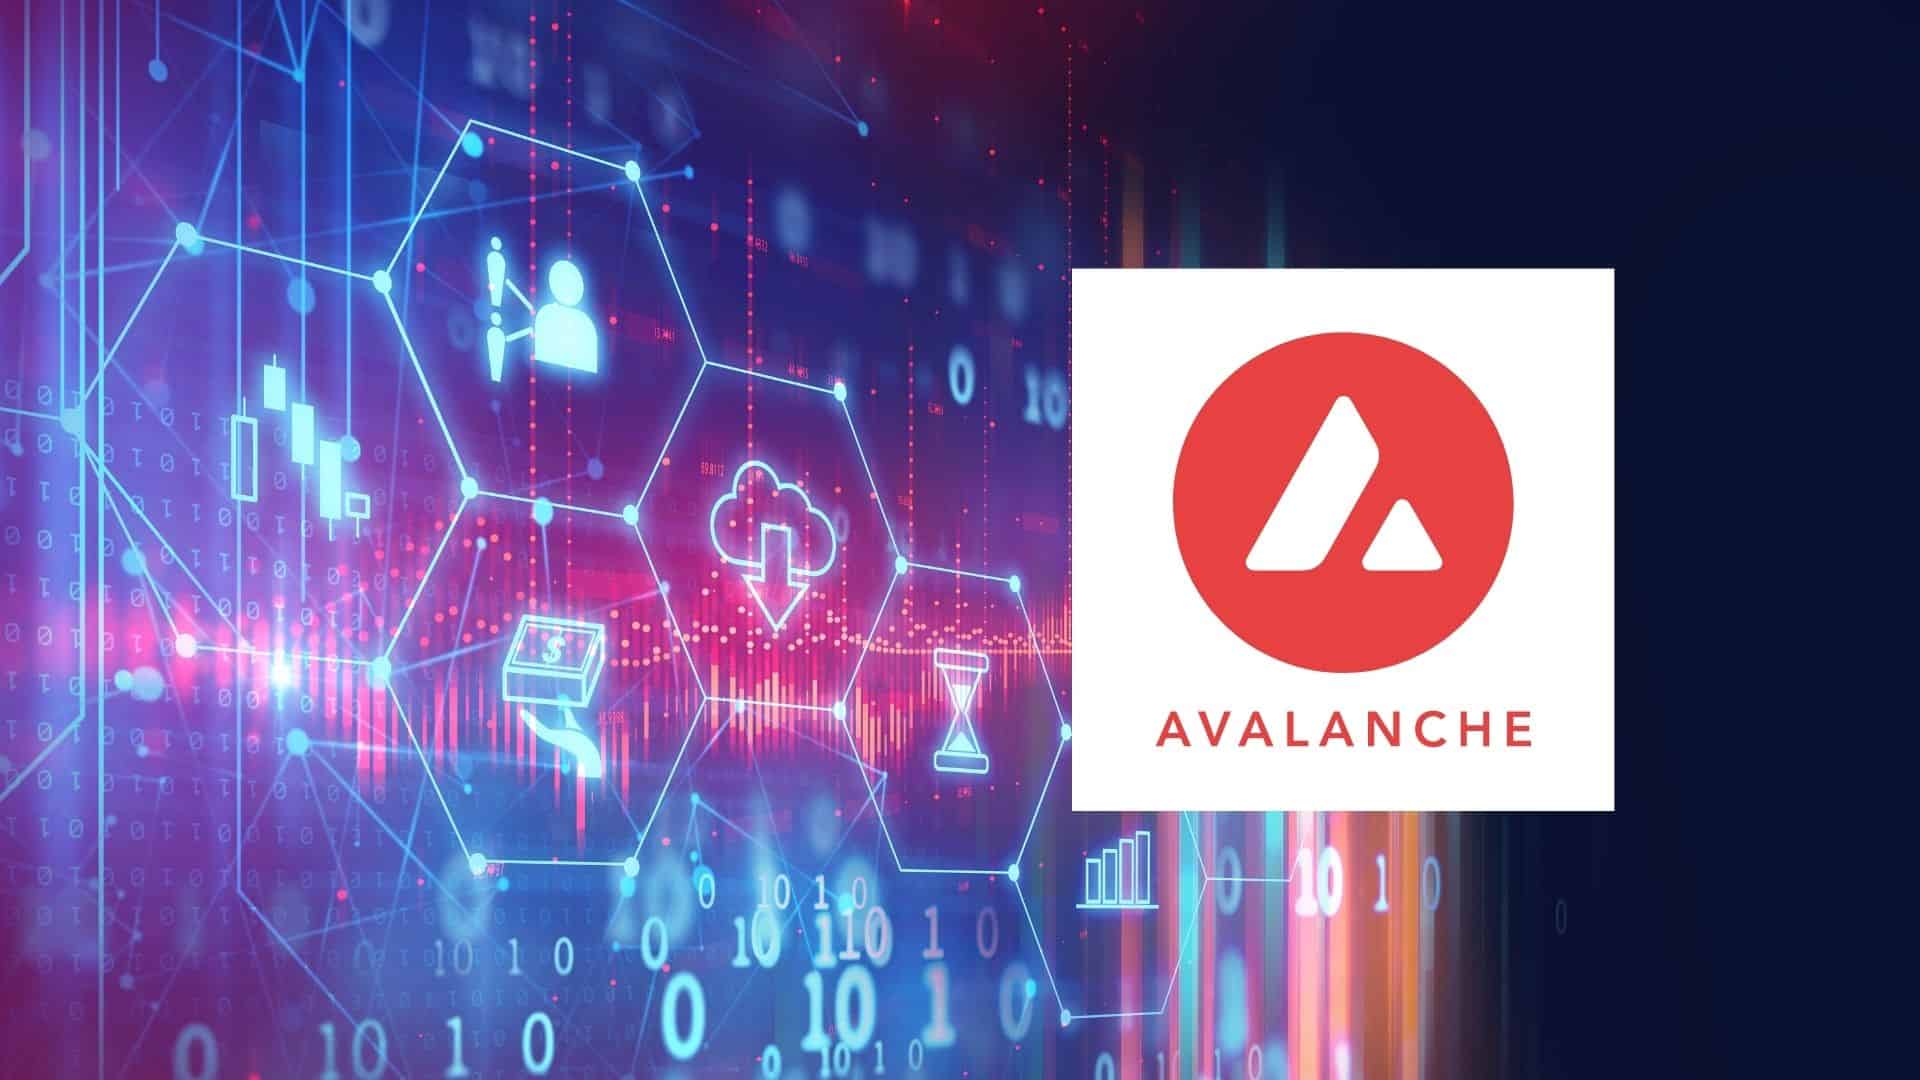 Avalanche's AVAX token surges to new all-time high